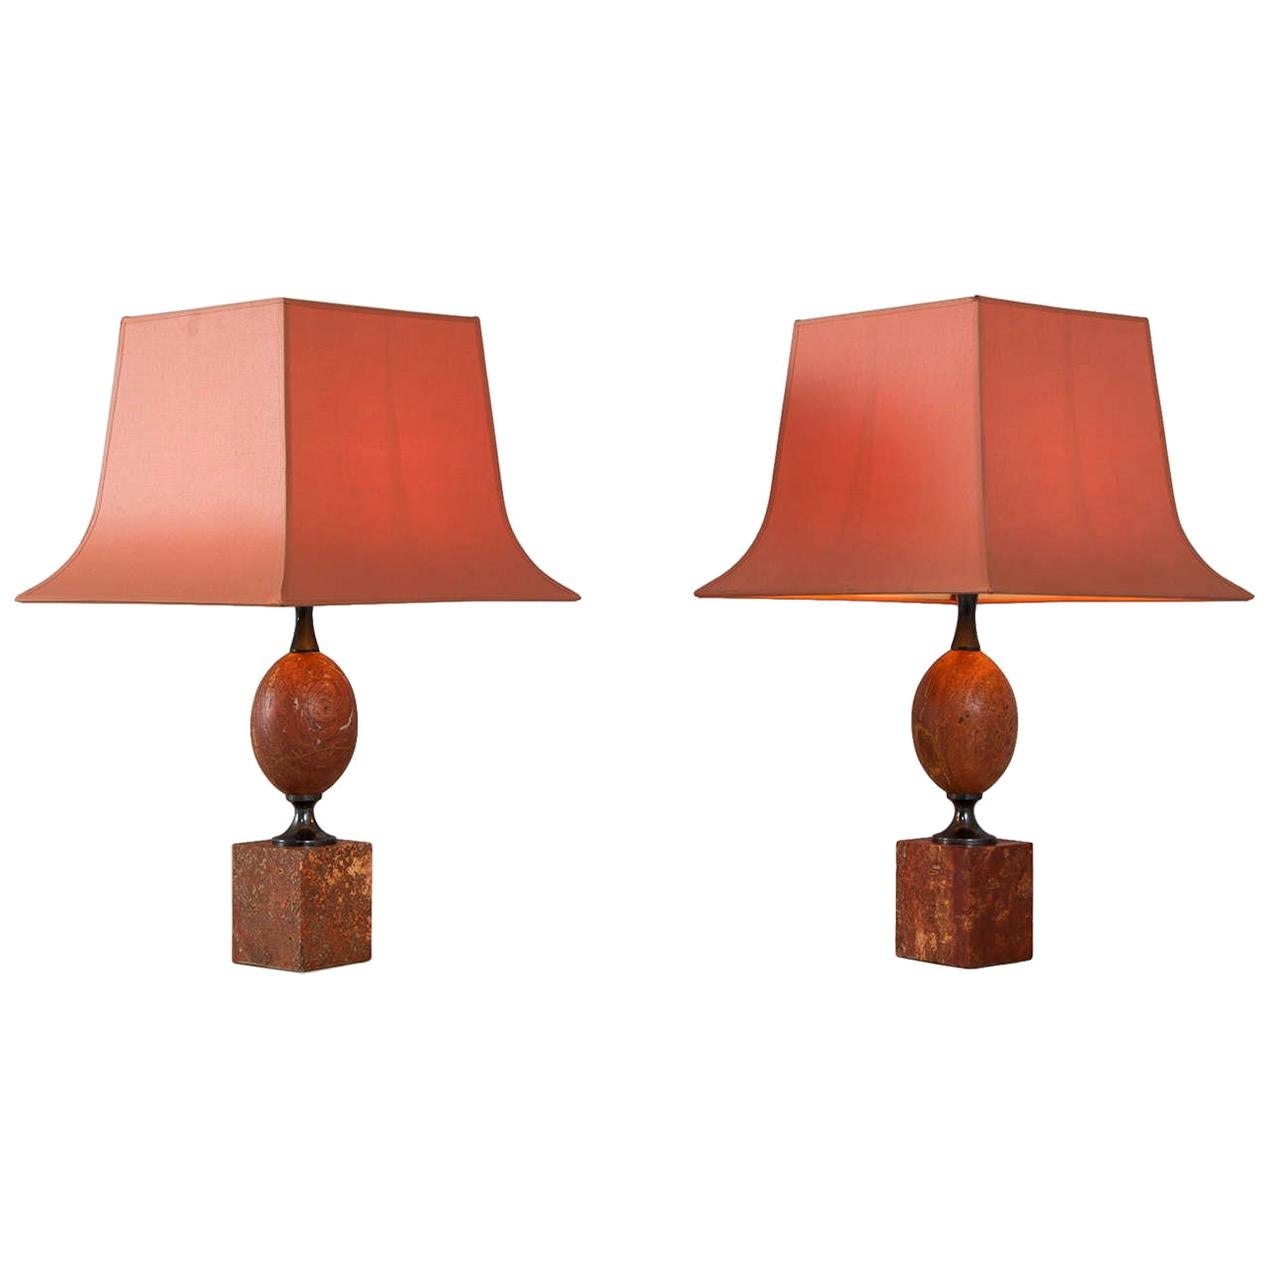 Matching Pair of Elegant Lights by Maison Barbier in Rare Red Travertine